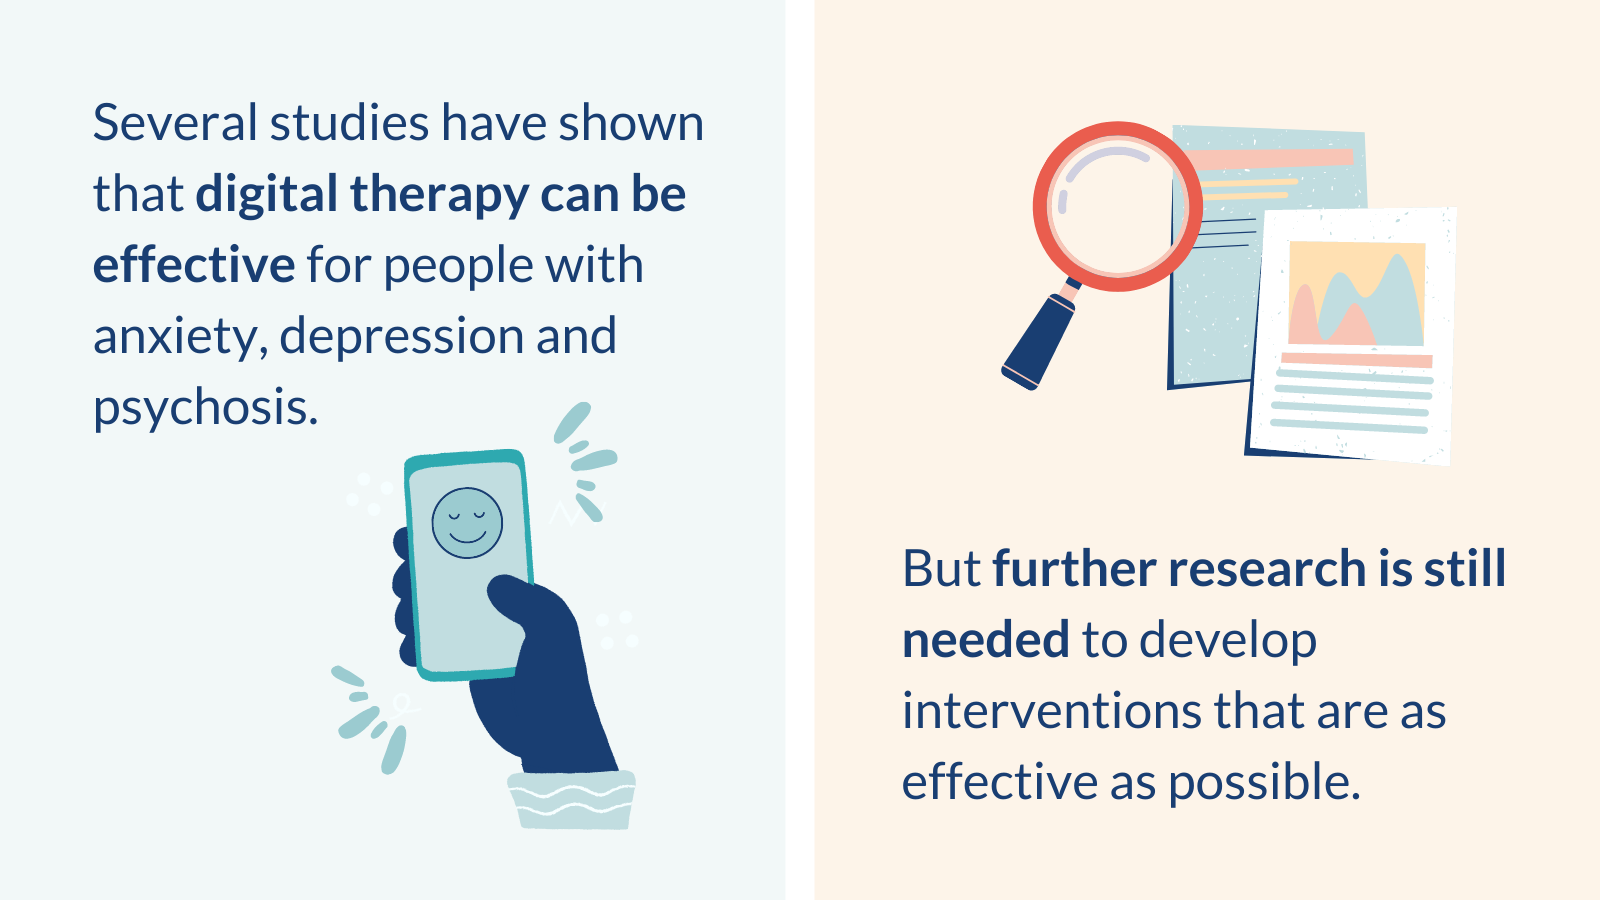 National Institute for health and care research infographic. Text displays: Several studies have shown that digital therapy can be effective for people with anxiety, depression and psychosis. But further research is still needed to develop interventions that are as effective as possible.